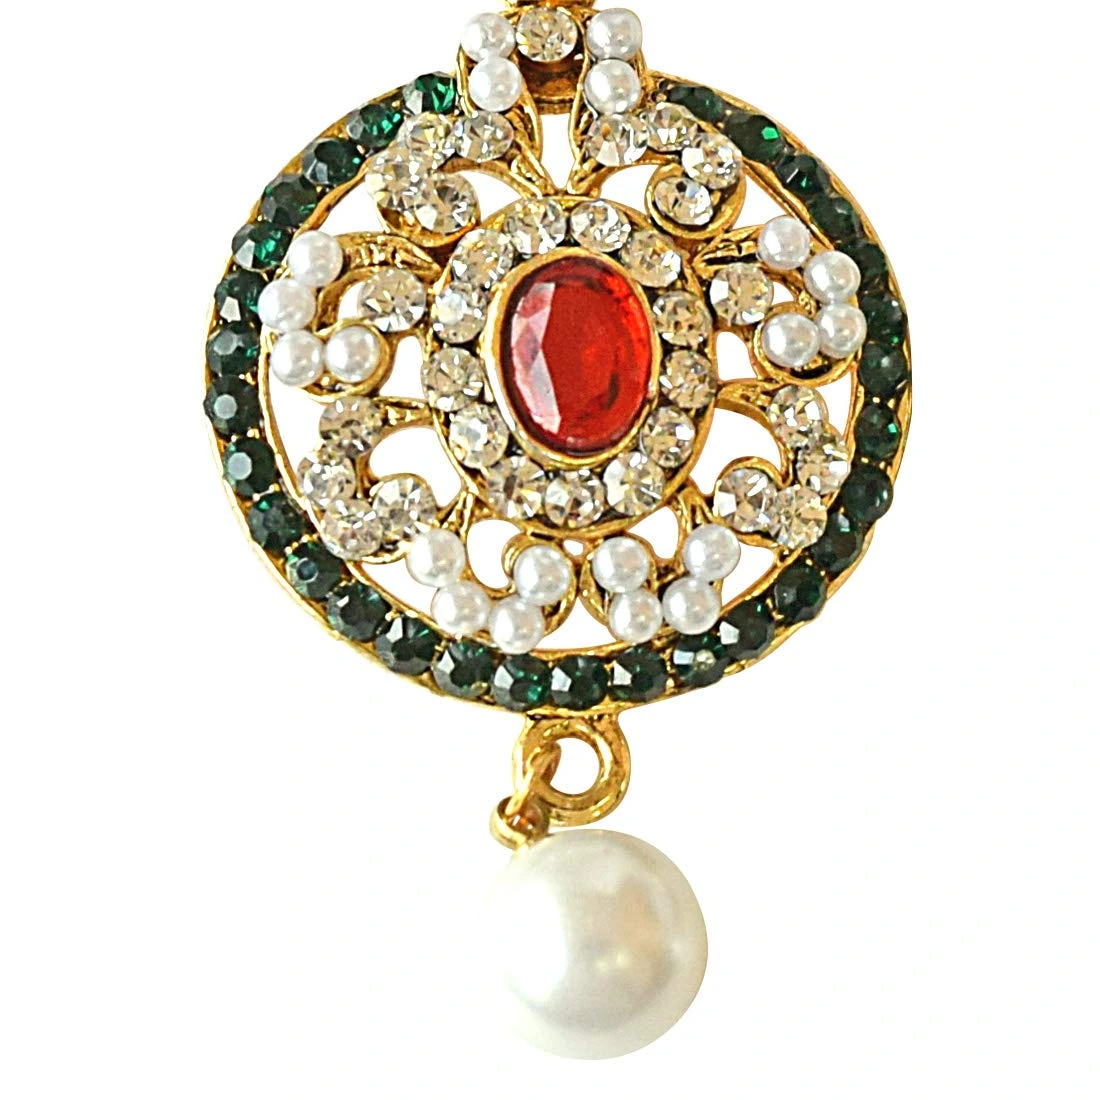 Round Shaped Red, Green & White Coloured Stone, Shell Pearl & Gold Plated Chand Bali Earrings (PSE15)